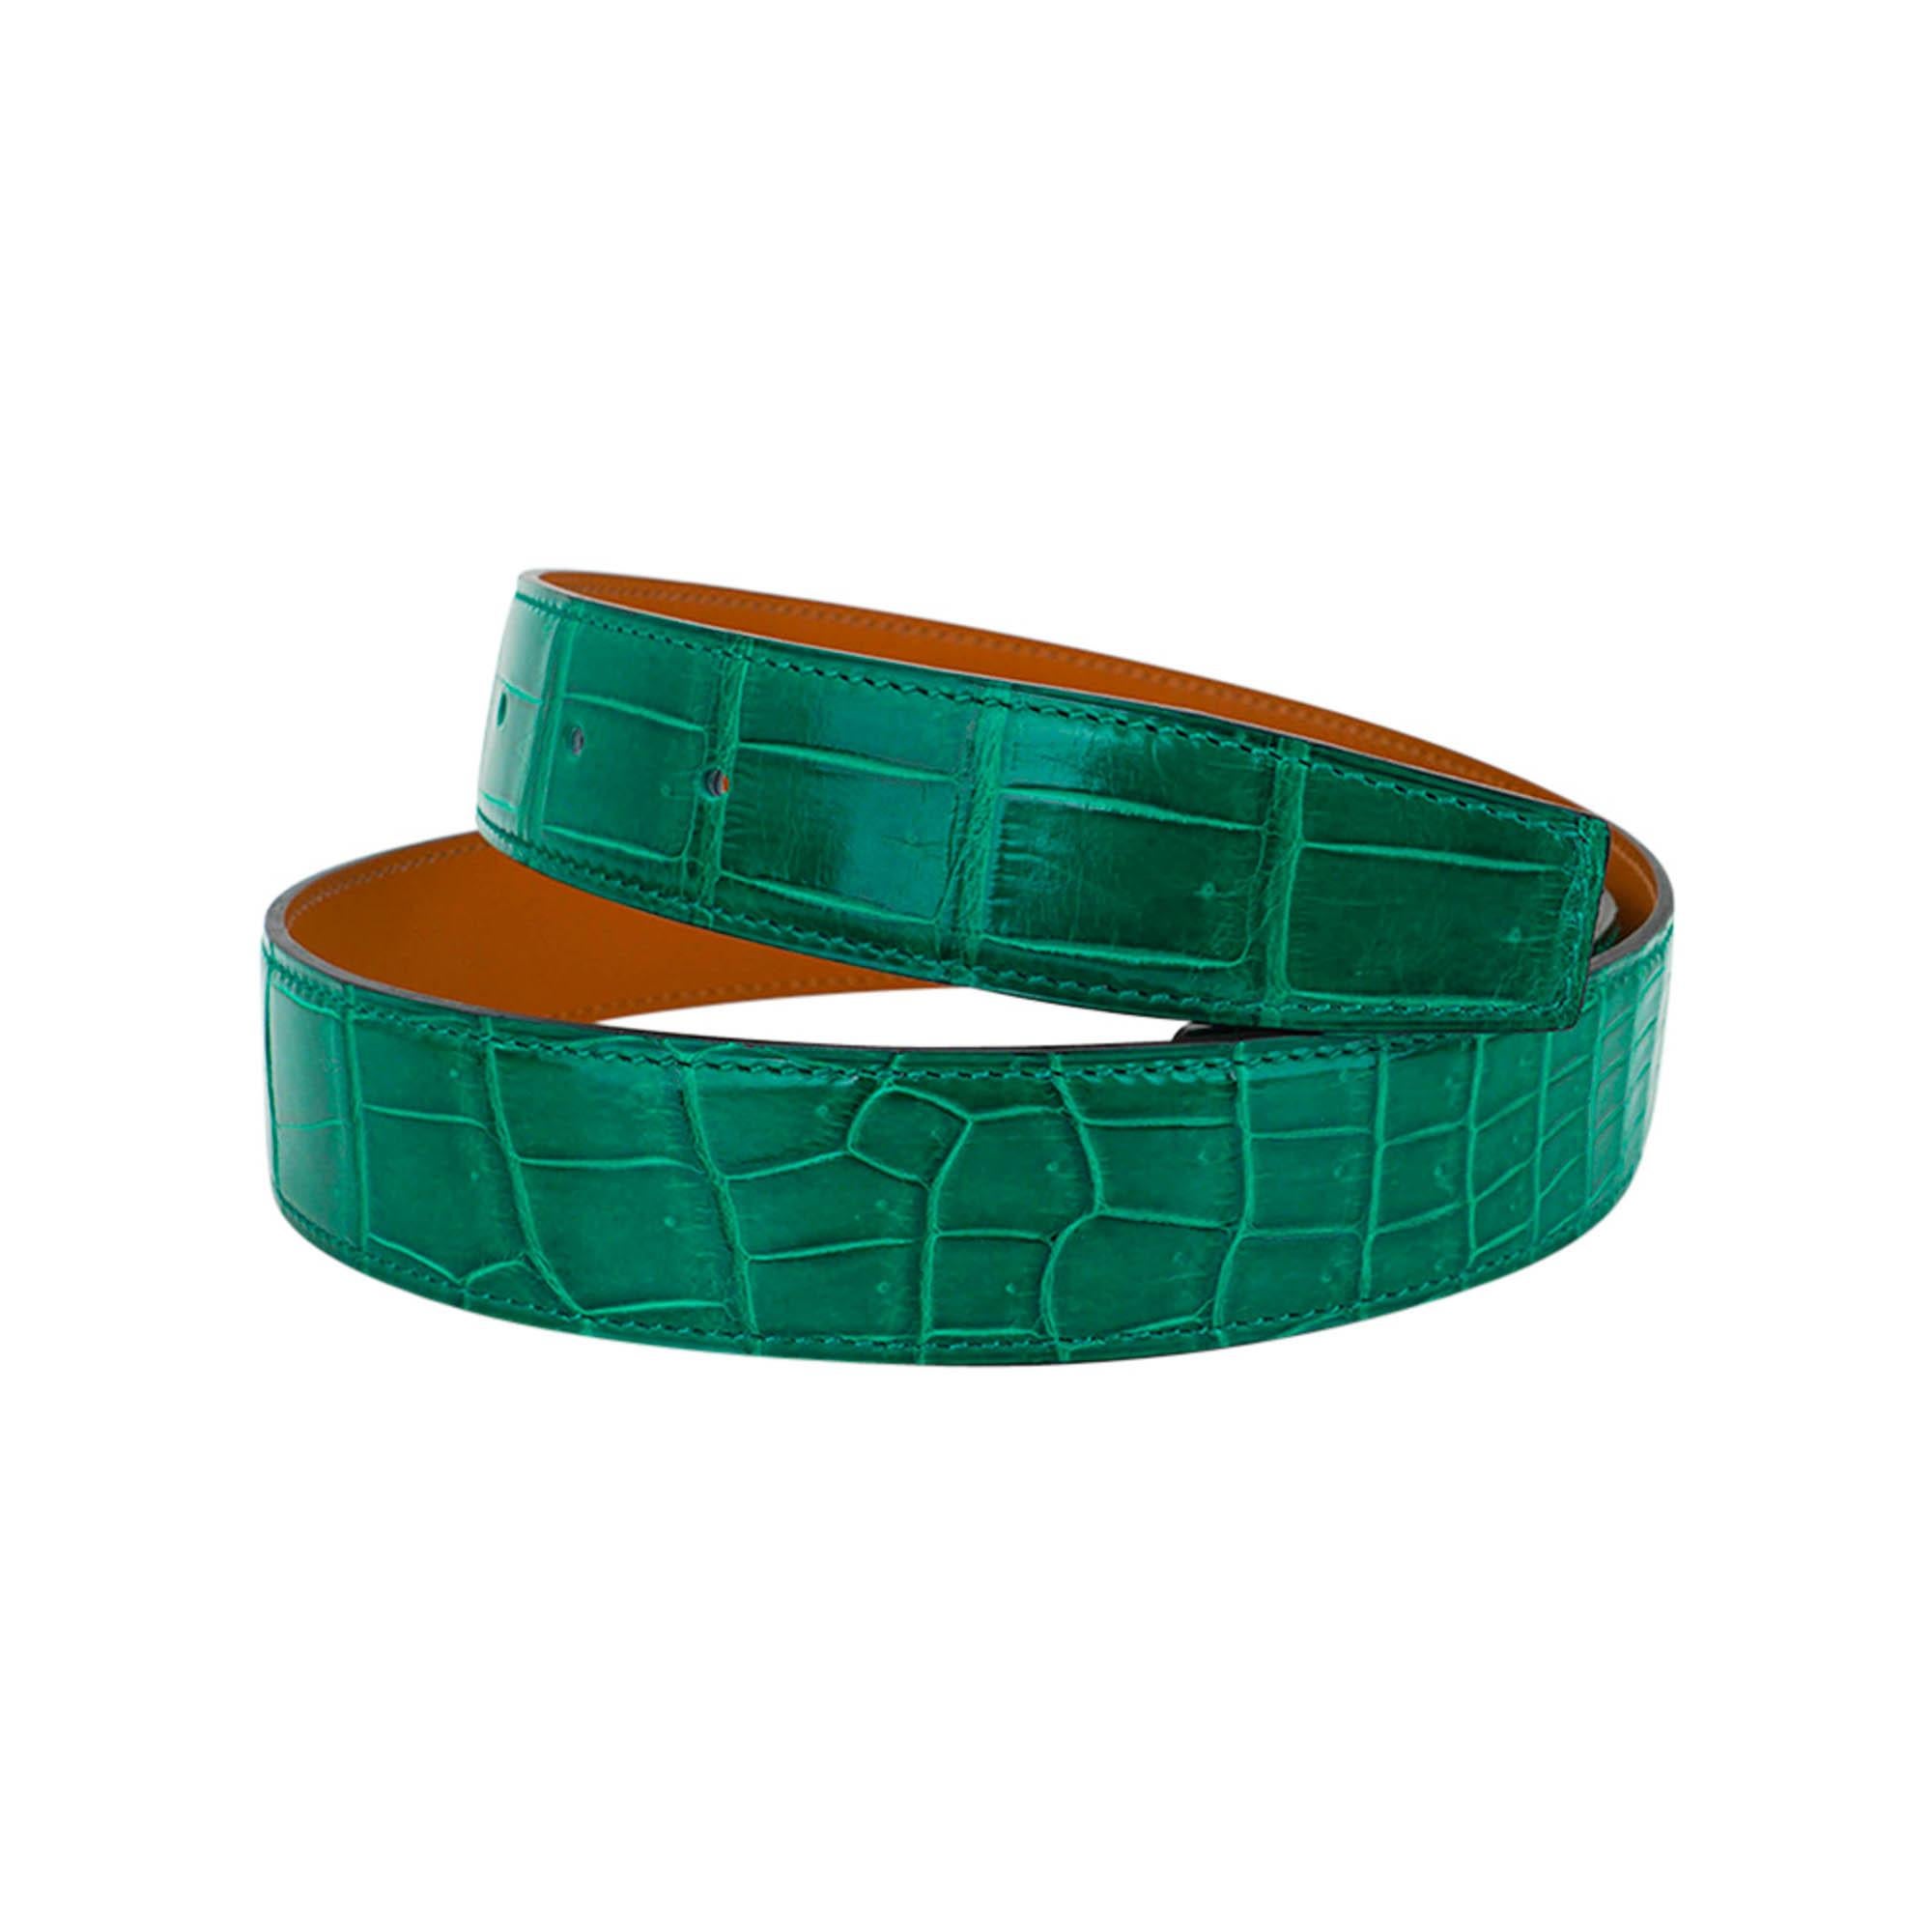 Mightychic offers an Hermes Constance 32 mm belt strap ONLY featured in coveted Vert Emeraude
Porosus Crocodile.
This richly saturated jewel toned green creates a very chic and wearable belt.
Pairs beautifully with either a Palladium or Gold 32 mm